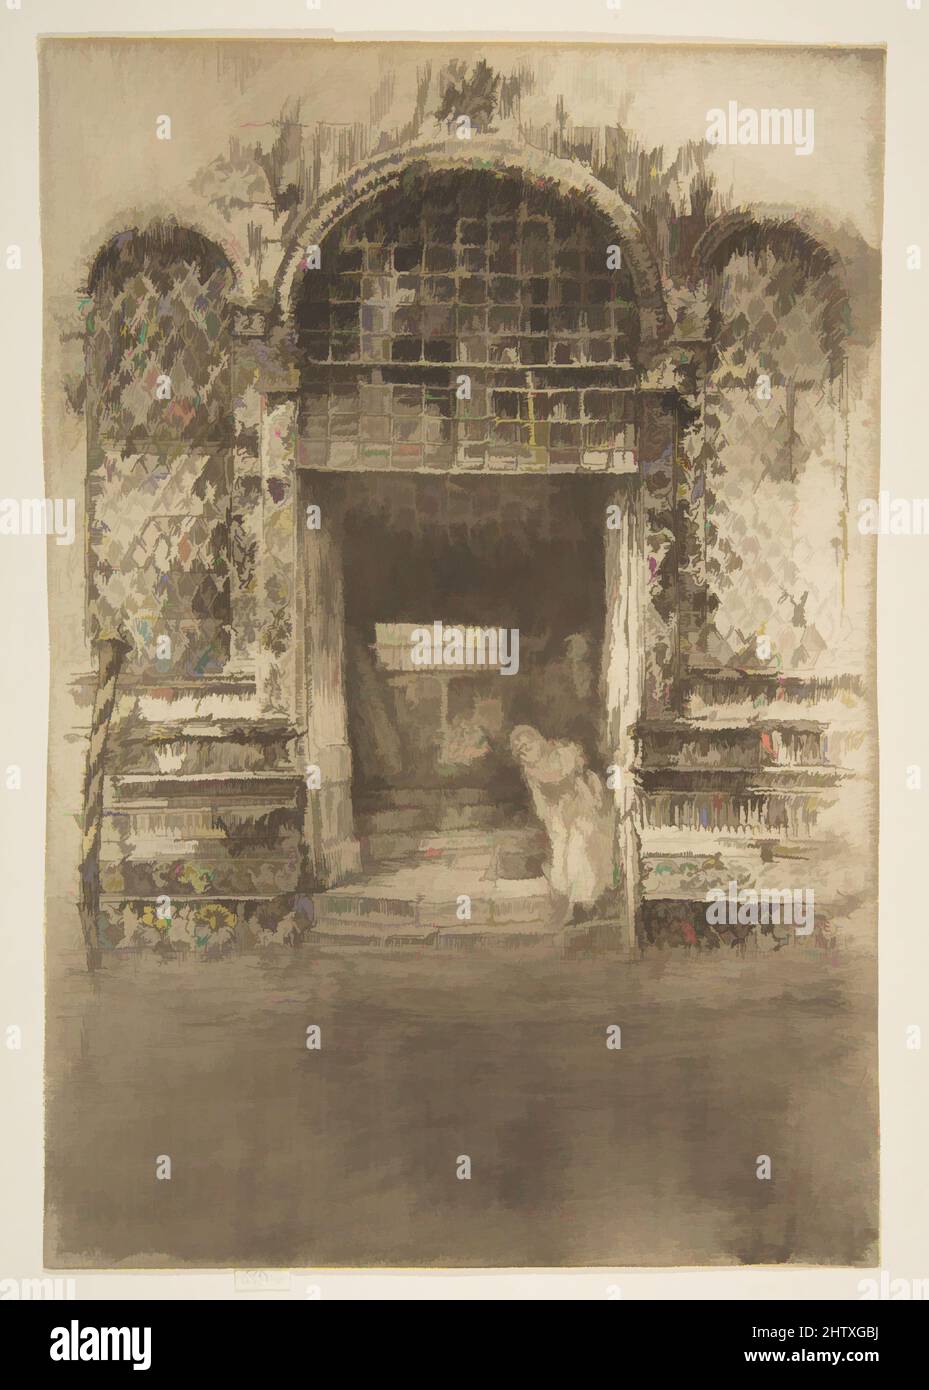 Art inspired by The Doorway, 1879–80, Etching, drypoint and roulette; fourteenth state of twenty (Glasgow); printed in brownish-black ink on ivory laid paper, Plate: 11 1/2 x 7 7/8 in. (29.2 x 20 cm), Prints, James McNeill Whistler (American, Lowell, Massachusetts 1834–1903 London, Classic works modernized by Artotop with a splash of modernity. Shapes, color and value, eye-catching visual impact on art. Emotions through freedom of artworks in a contemporary way. A timeless message pursuing a wildly creative new direction. Artists turning to the digital medium and creating the Artotop NFT Stock Photo